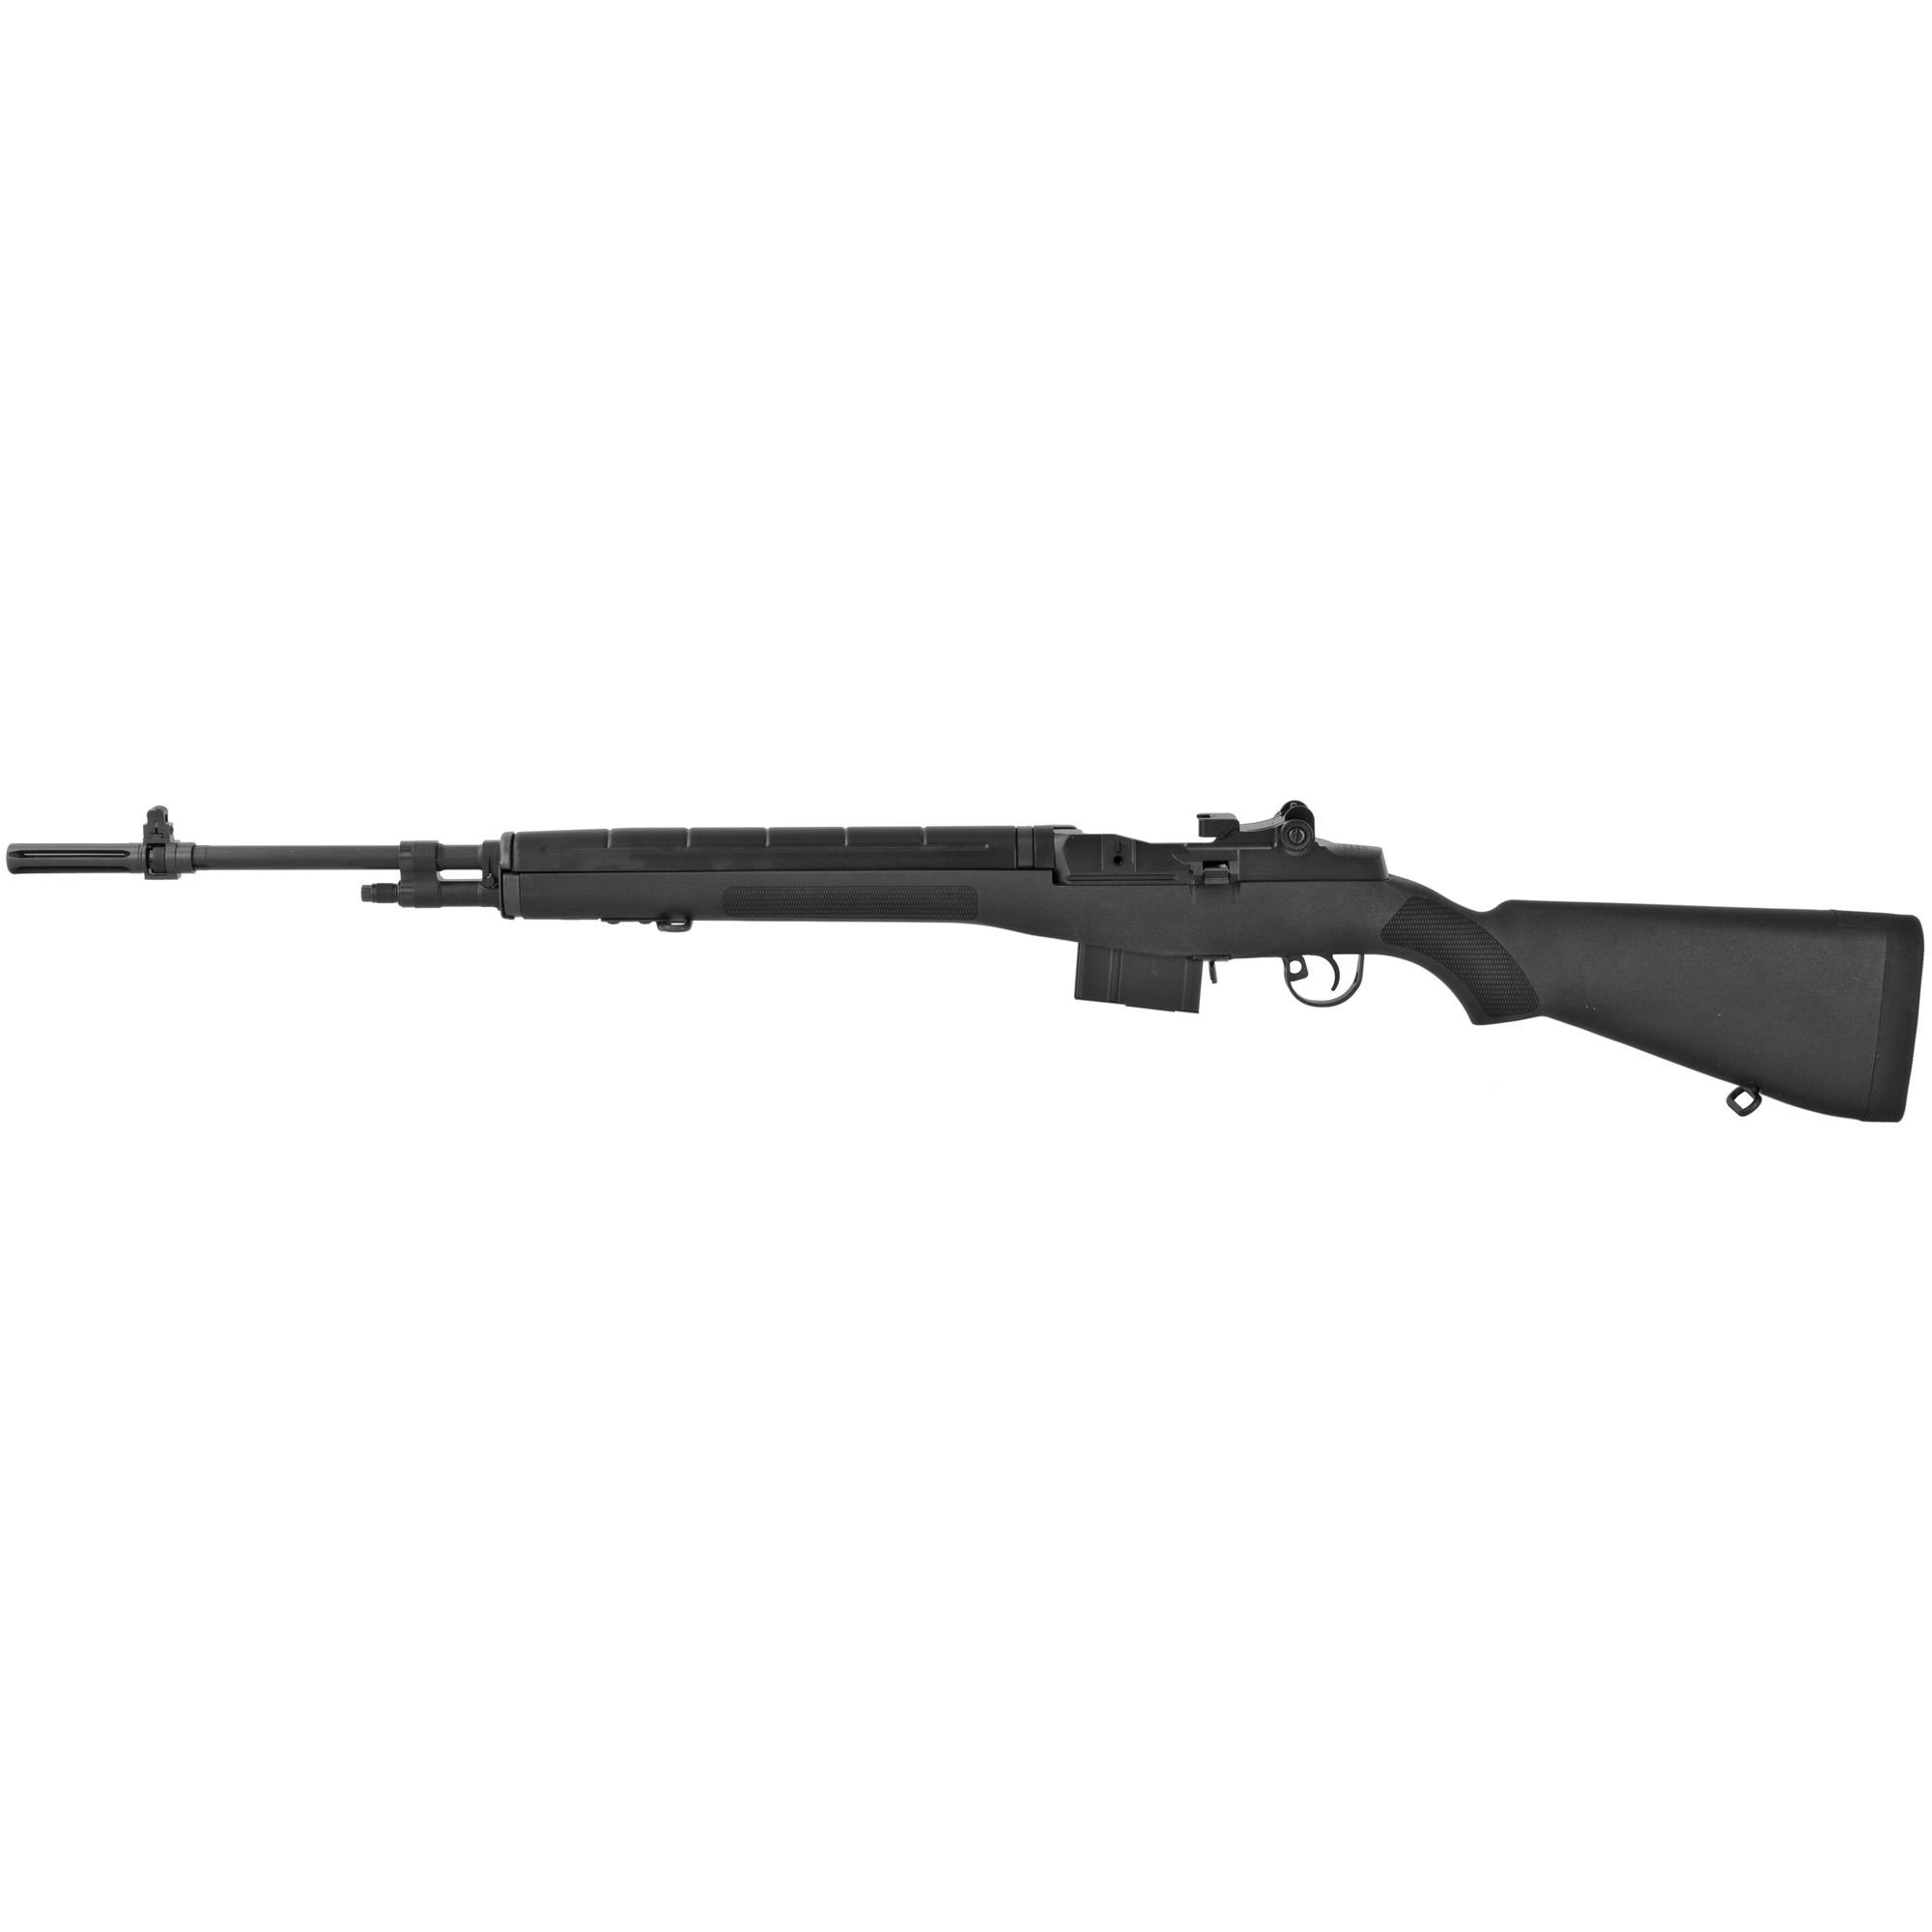 SPRINGFIELD M1A 308 BLK SYN 10RD